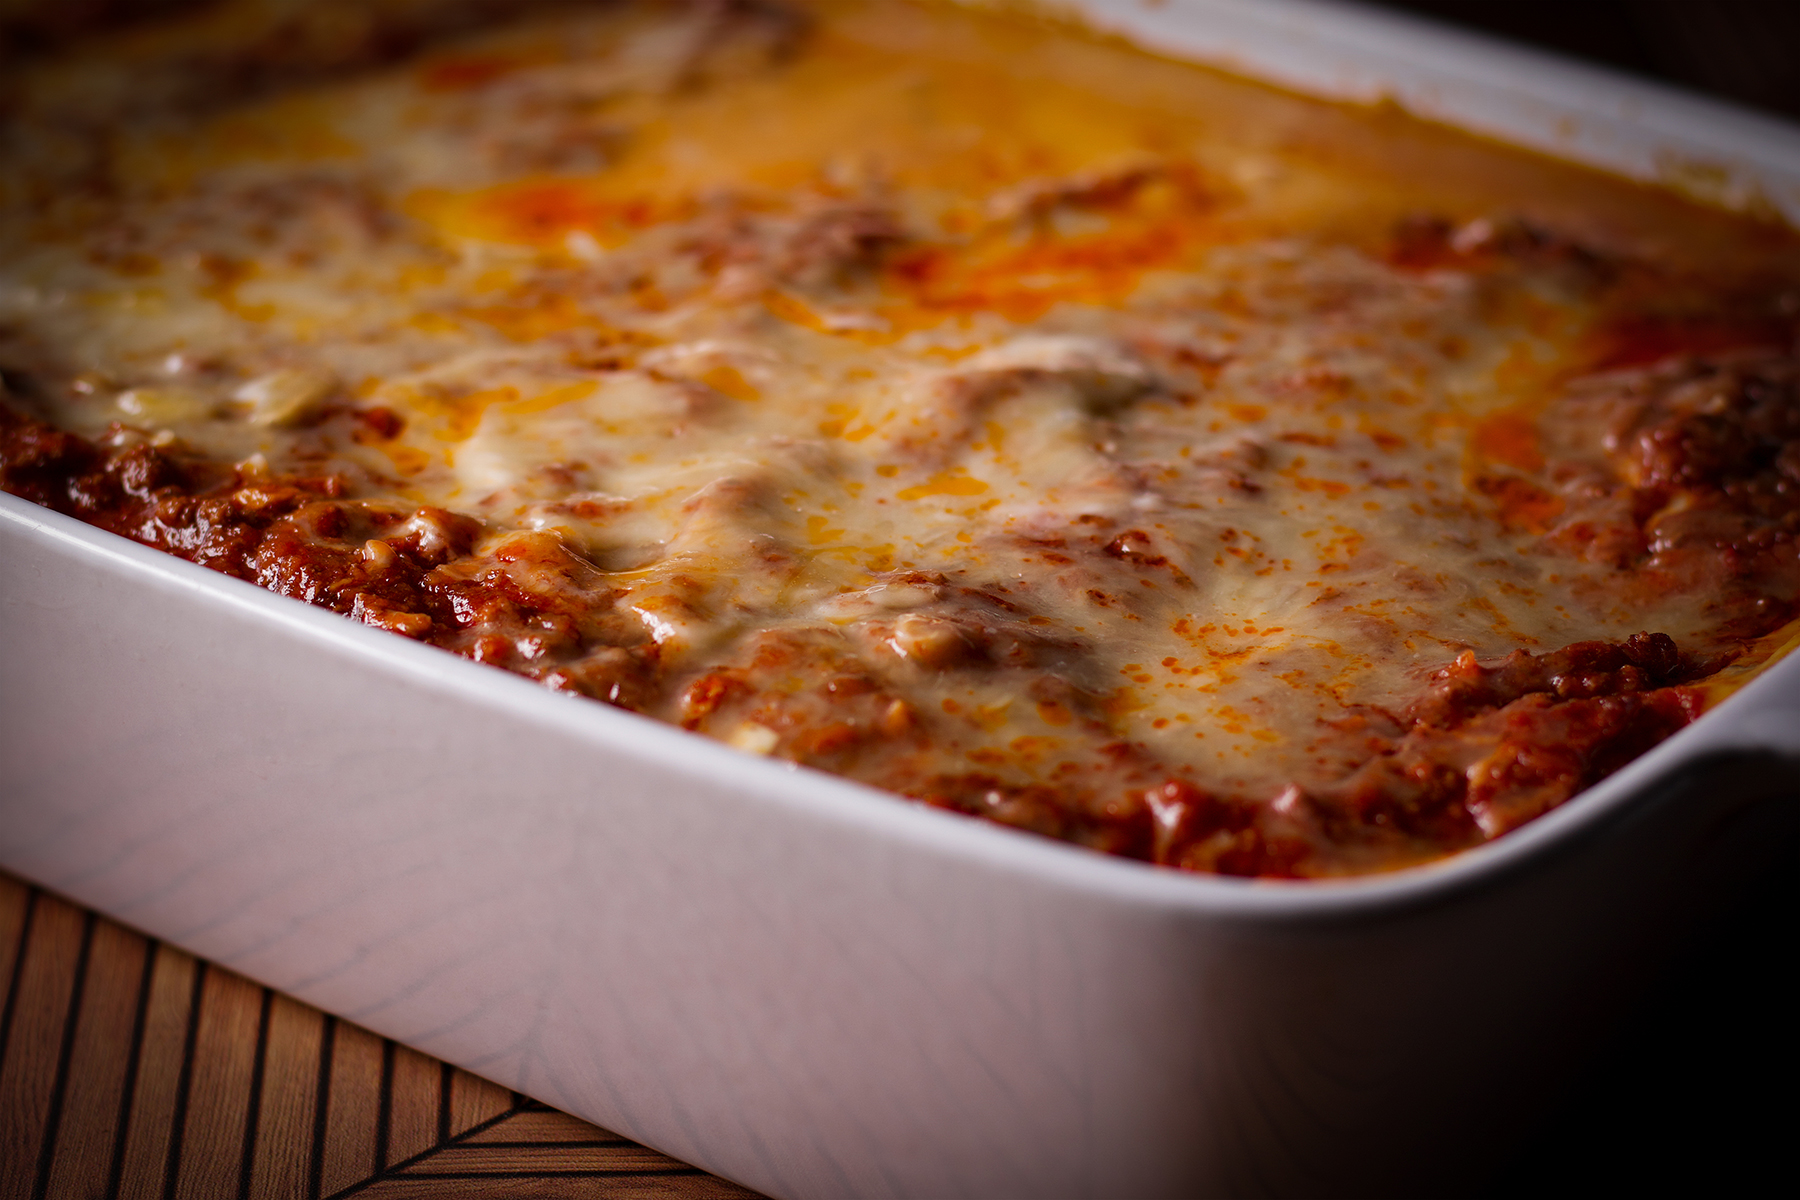 Freshly baked lasagna bolognese in a white casserole dish.